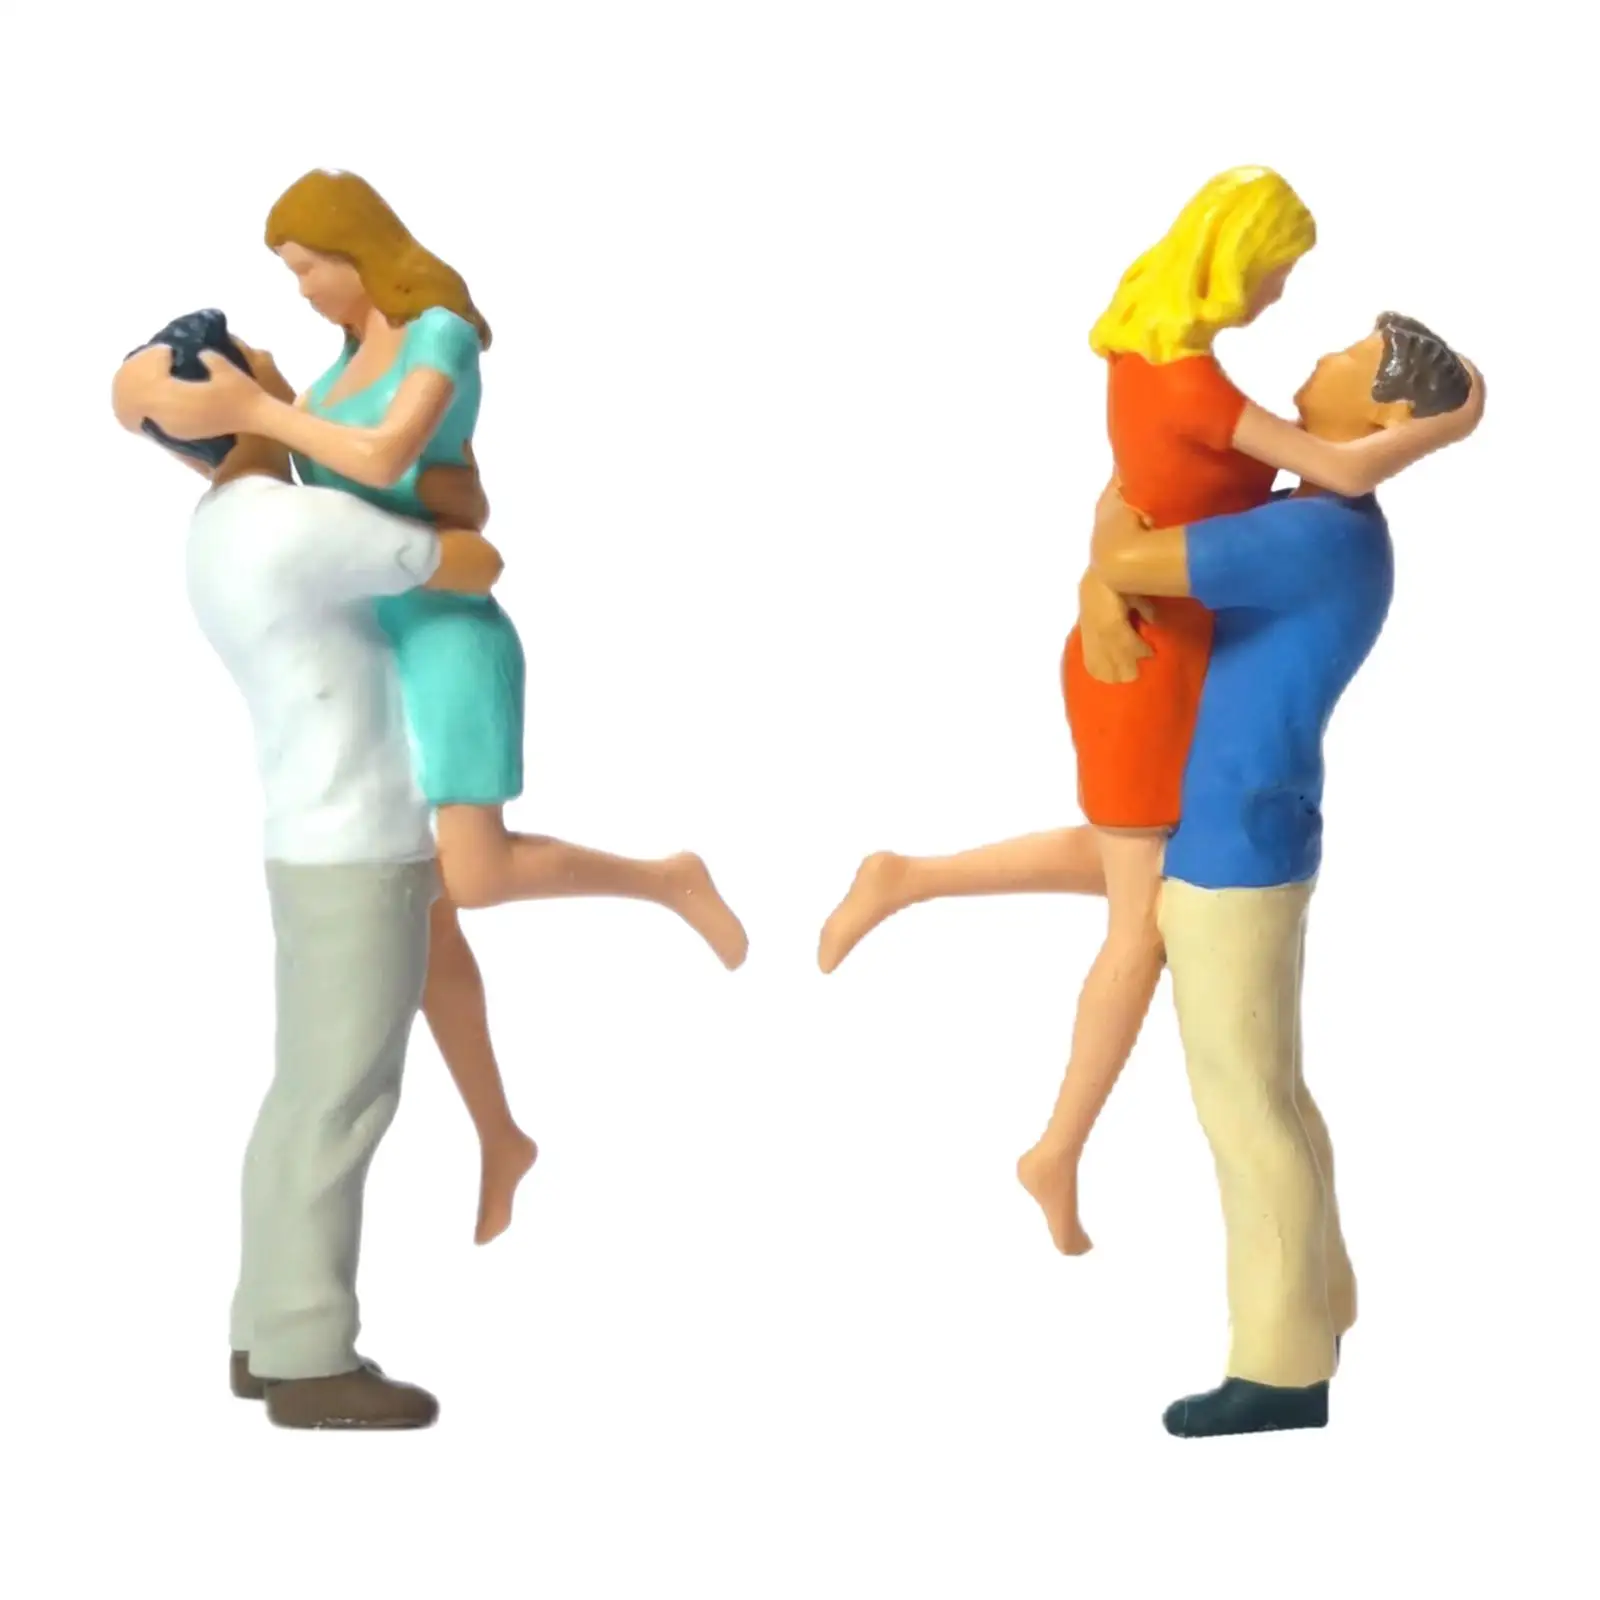 Resin 1/64 Hugging Couple Model Figure Collectibles Model Trains People Figures for DIY Scene Dollhouse Photography Props Layout